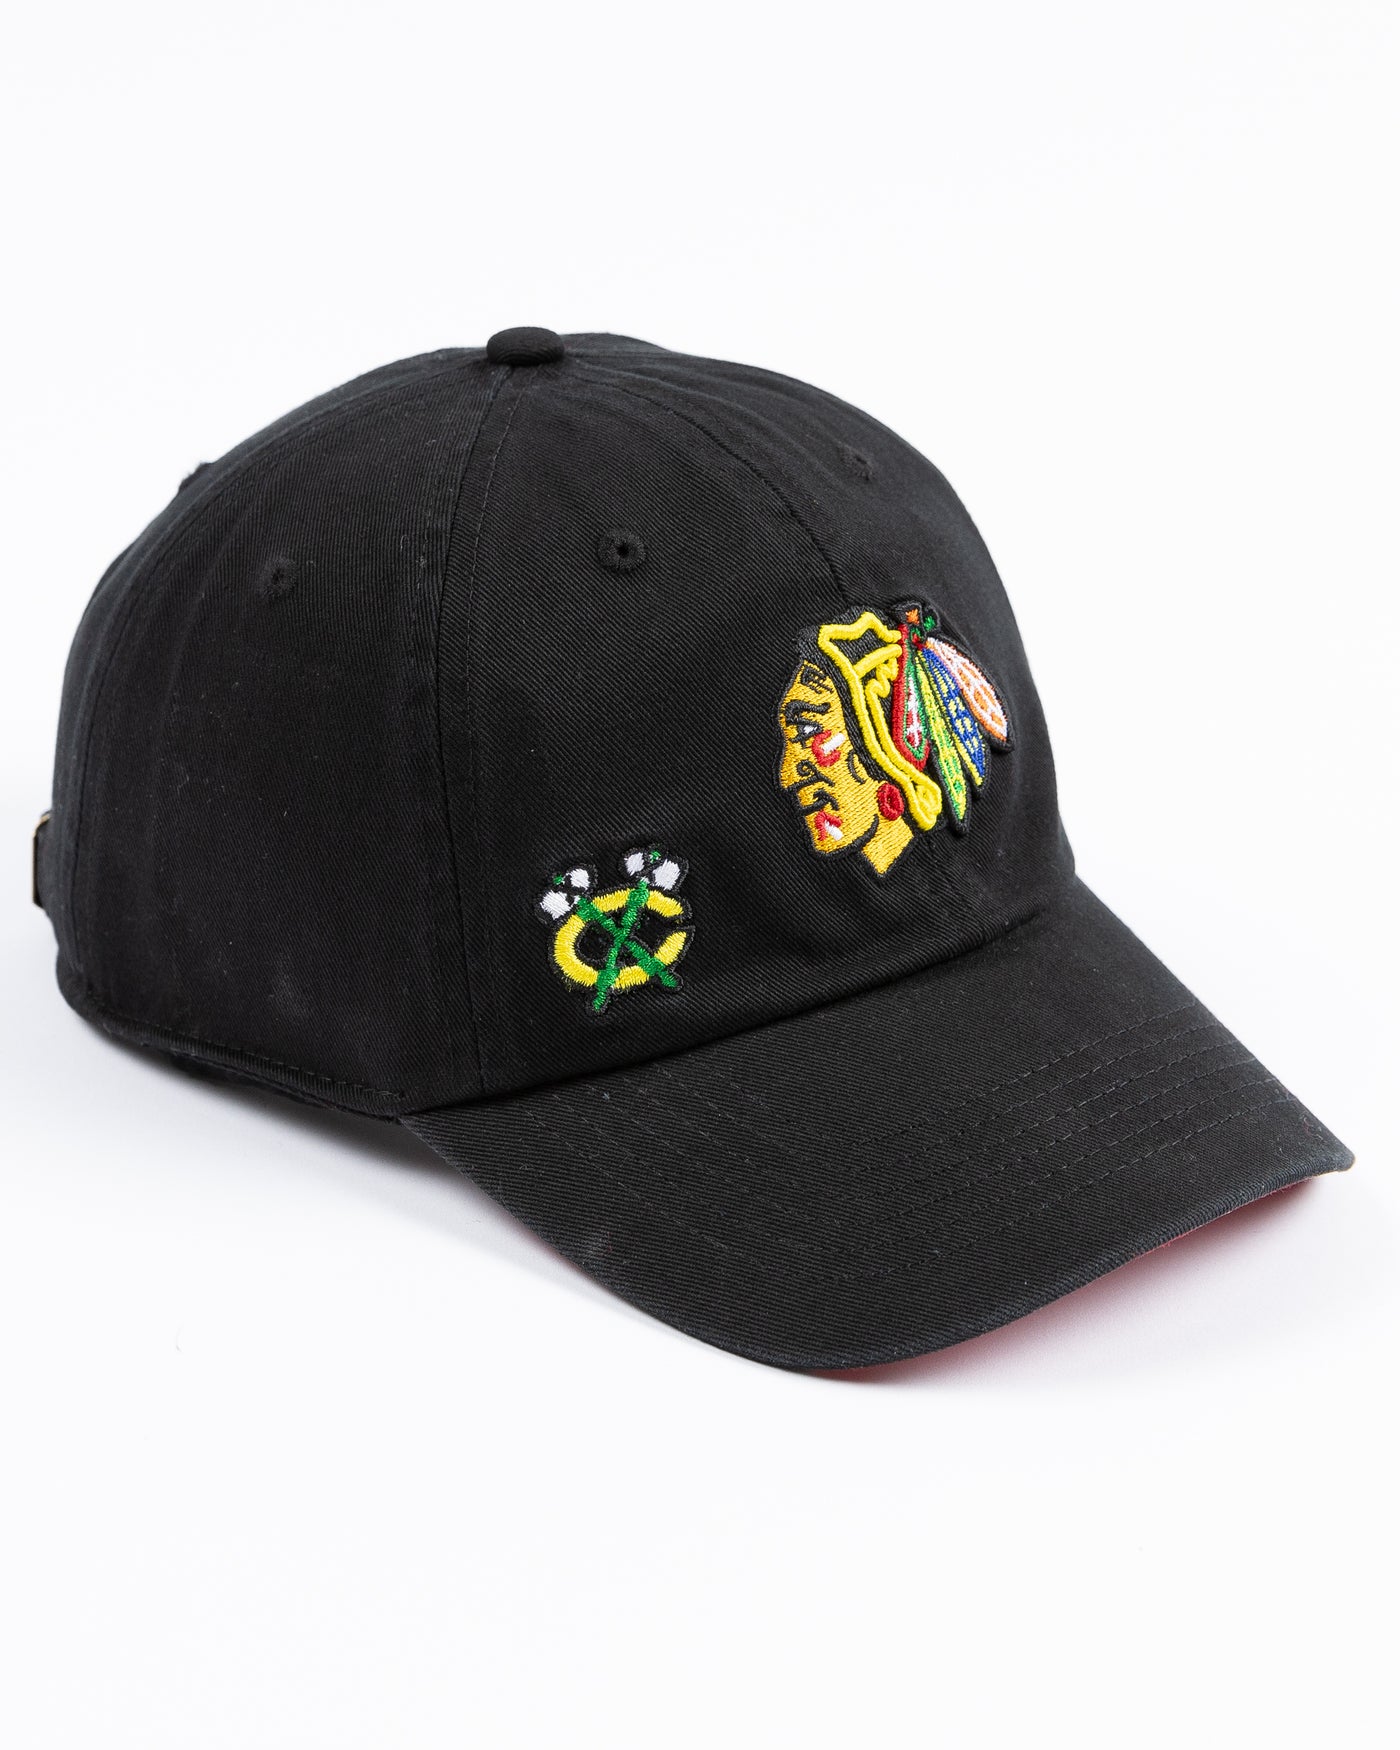 black ladies '47 brand clean up cap with Chicago Blackhawks primary and secondary logos embroidered on the front - right angle lay flat